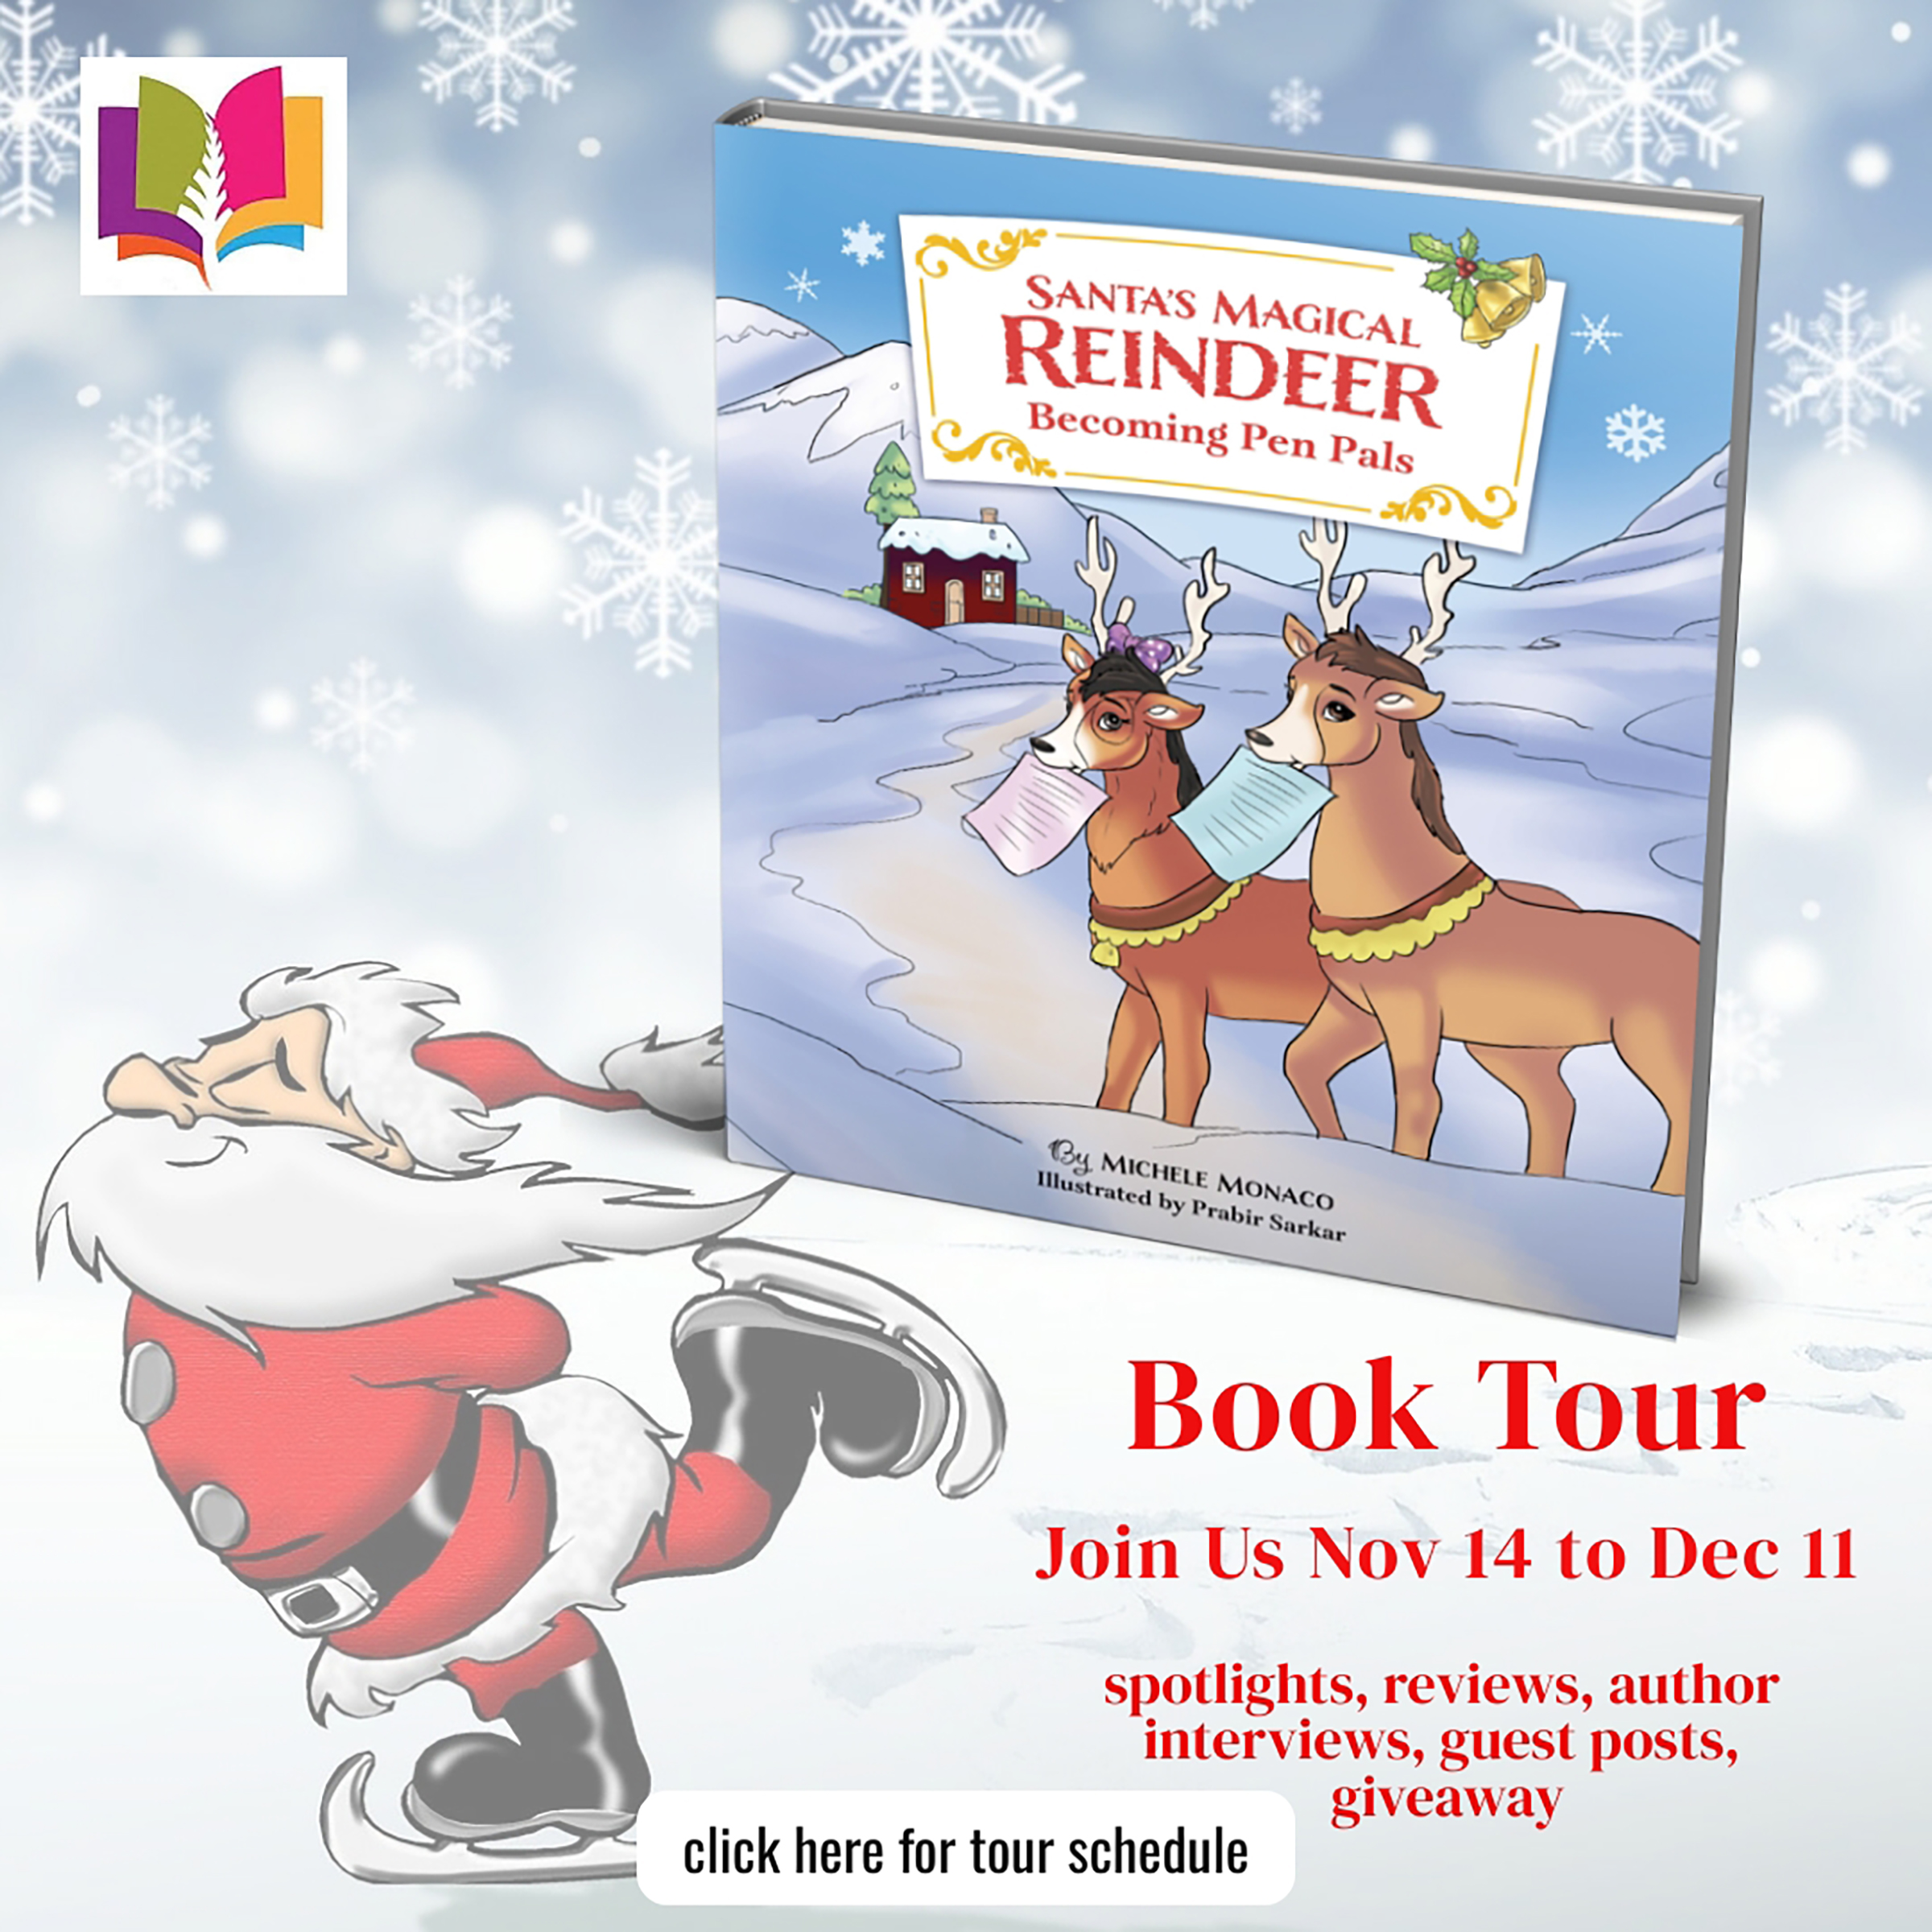 Santa's Magical Reindeer: Becoming Pen Pals by Michele Monaco | Book Review ~ Guest Post by Author ~ Giveaway (1 Signed Copy) | Children's Picture Book @ireadbooktours @sleighbellcity